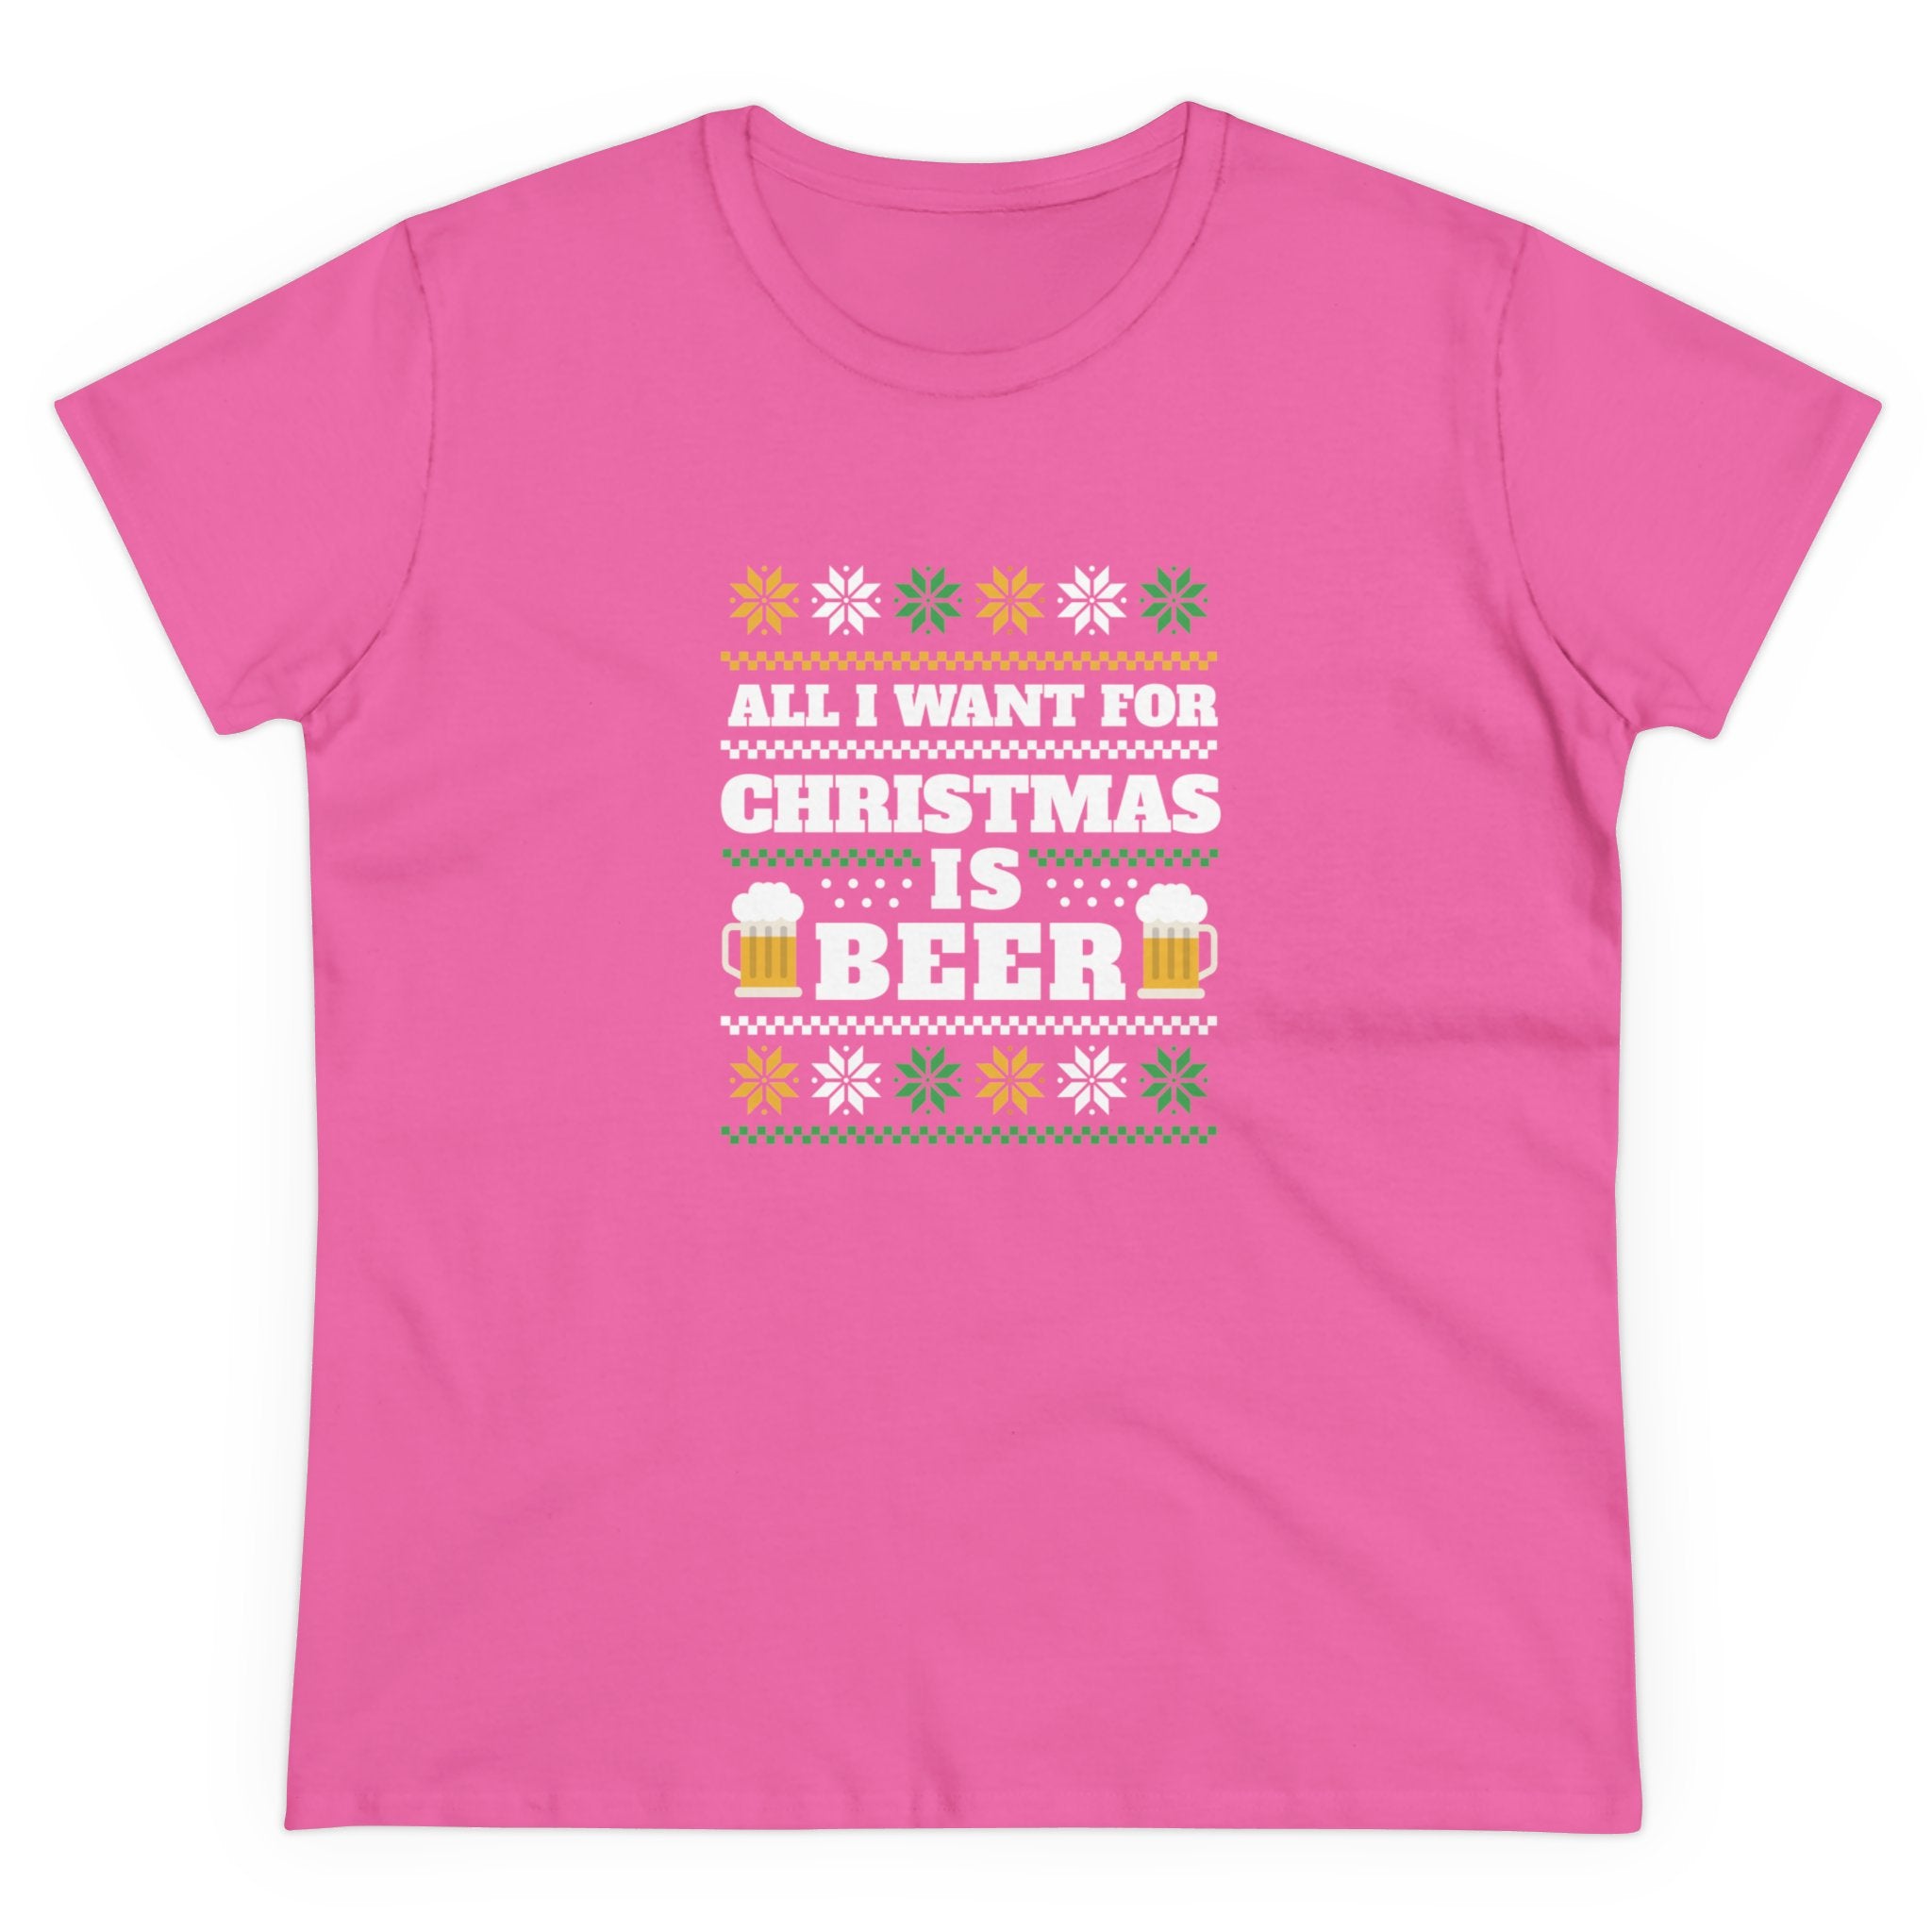 A pink, pre-shrunk cotton Beer Ugly Sweater - Women's Tee with a holiday-themed design that reads "All I Want For Christmas Is Beer" featuring images of beer mugs and decorative snowflakes.